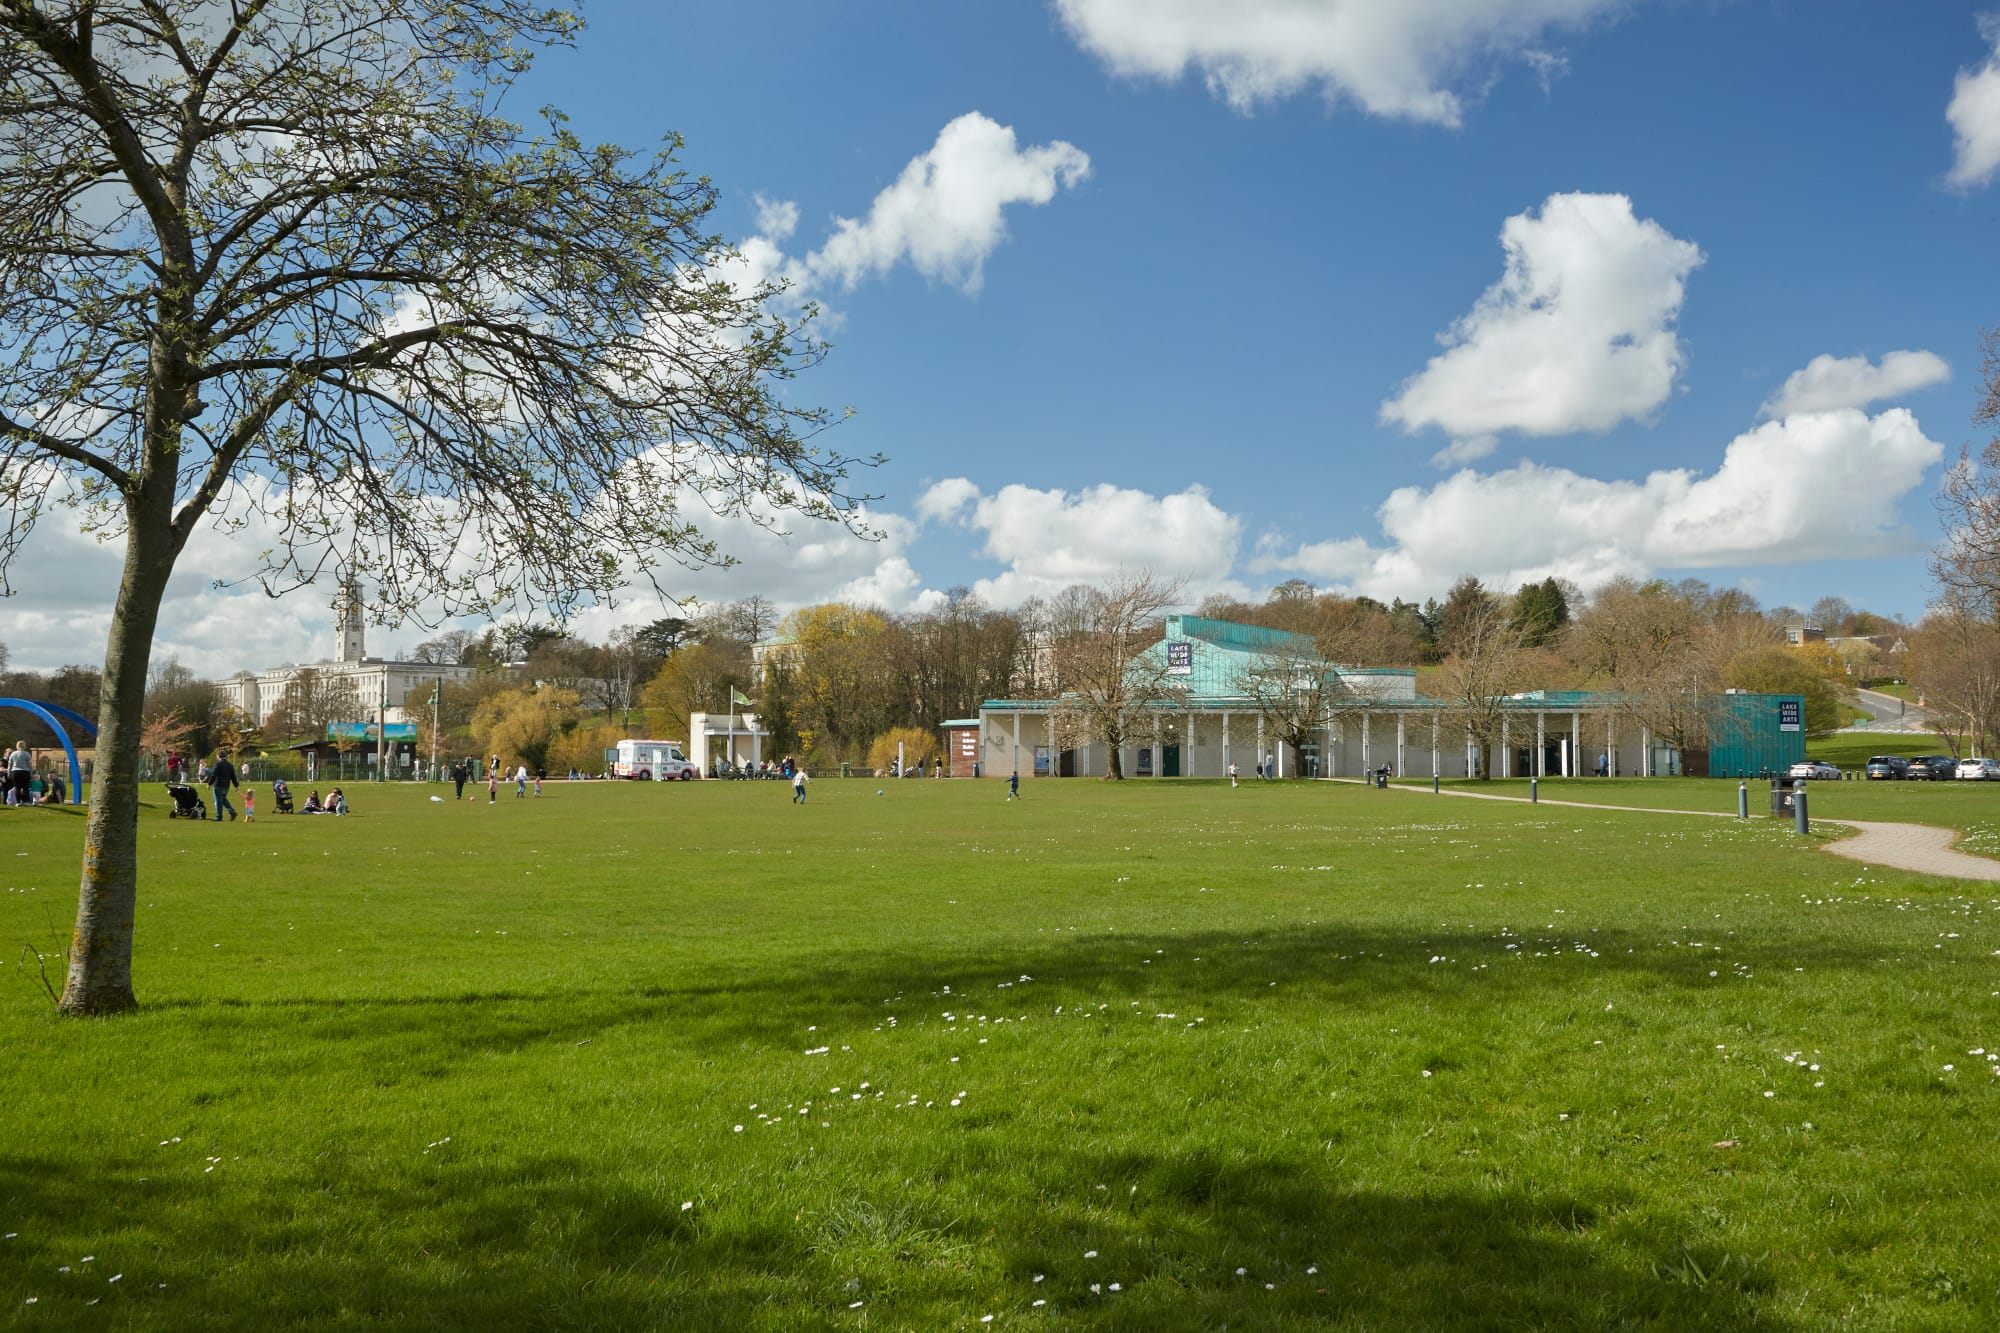 Grass interspersed with daisies, a winding path and a small tree just coming into lead dominate the foreground. Children playing in Highfields Park, an ice cream van and Lakeside Arts' DH Lawrence Pavilion are in the background. A bright blue sky with white fluffy clouds is overhead.